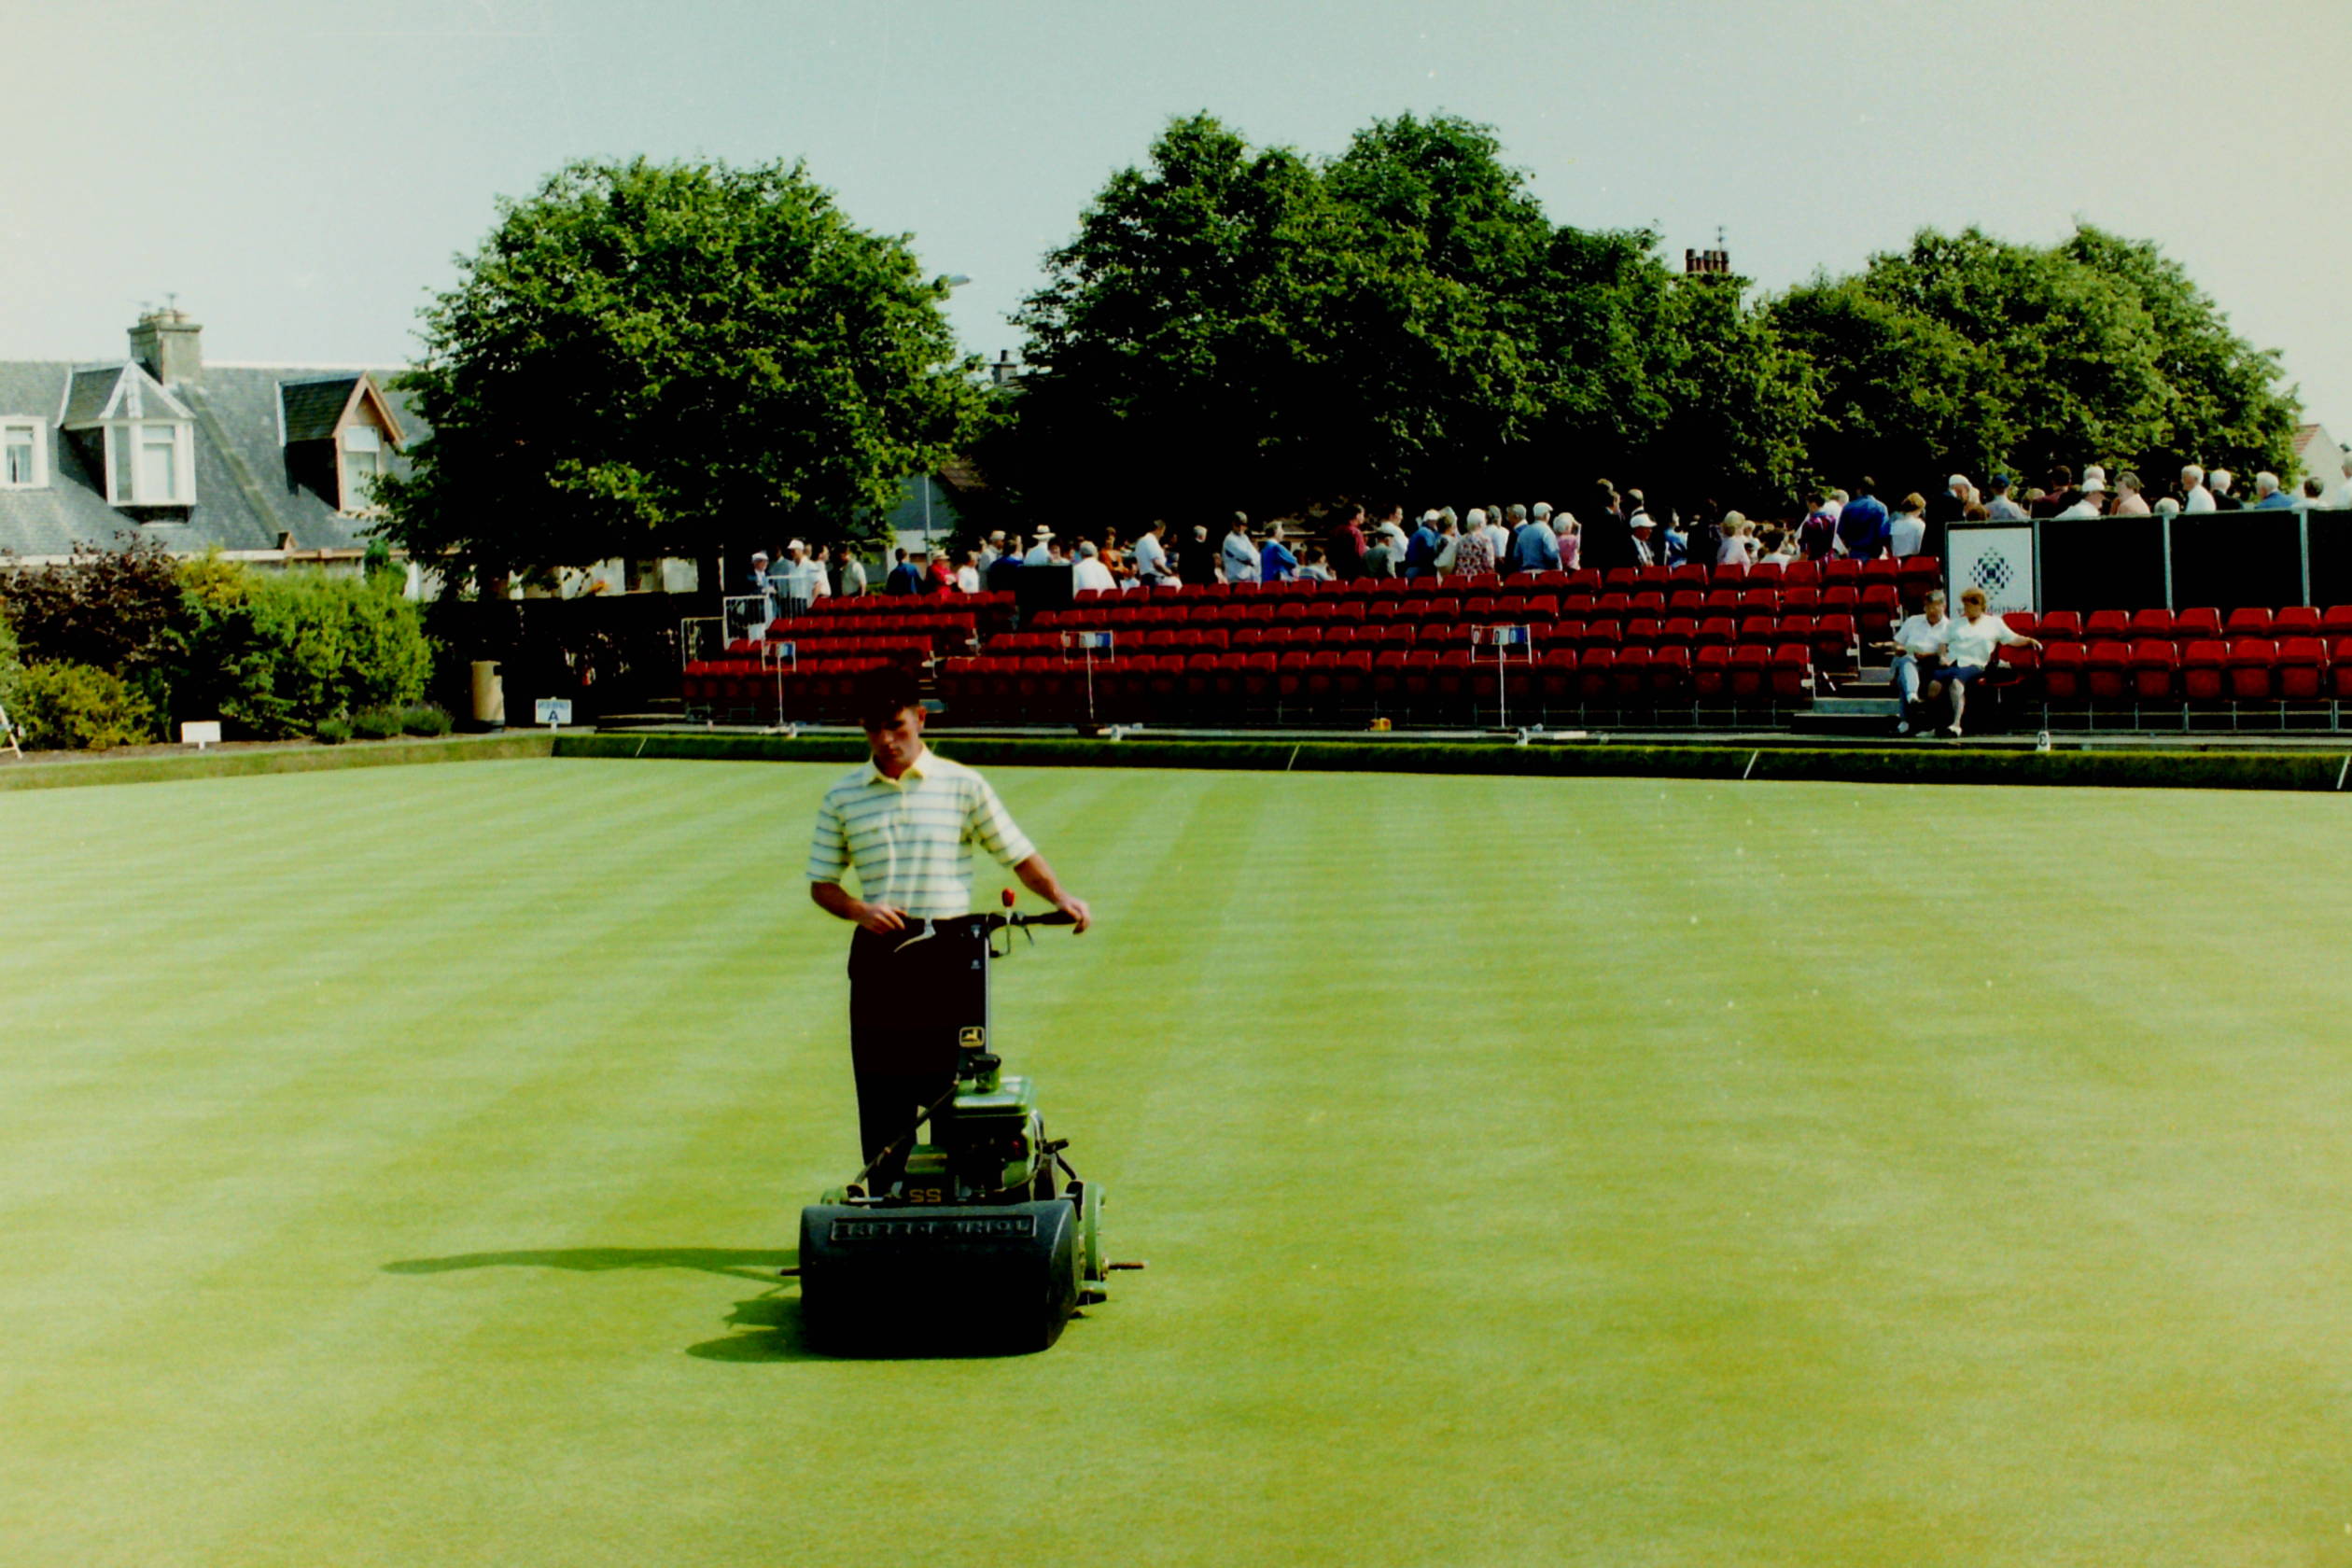 Duncan #39 s Bowling Green Maintenance Services: How I Can Help Your